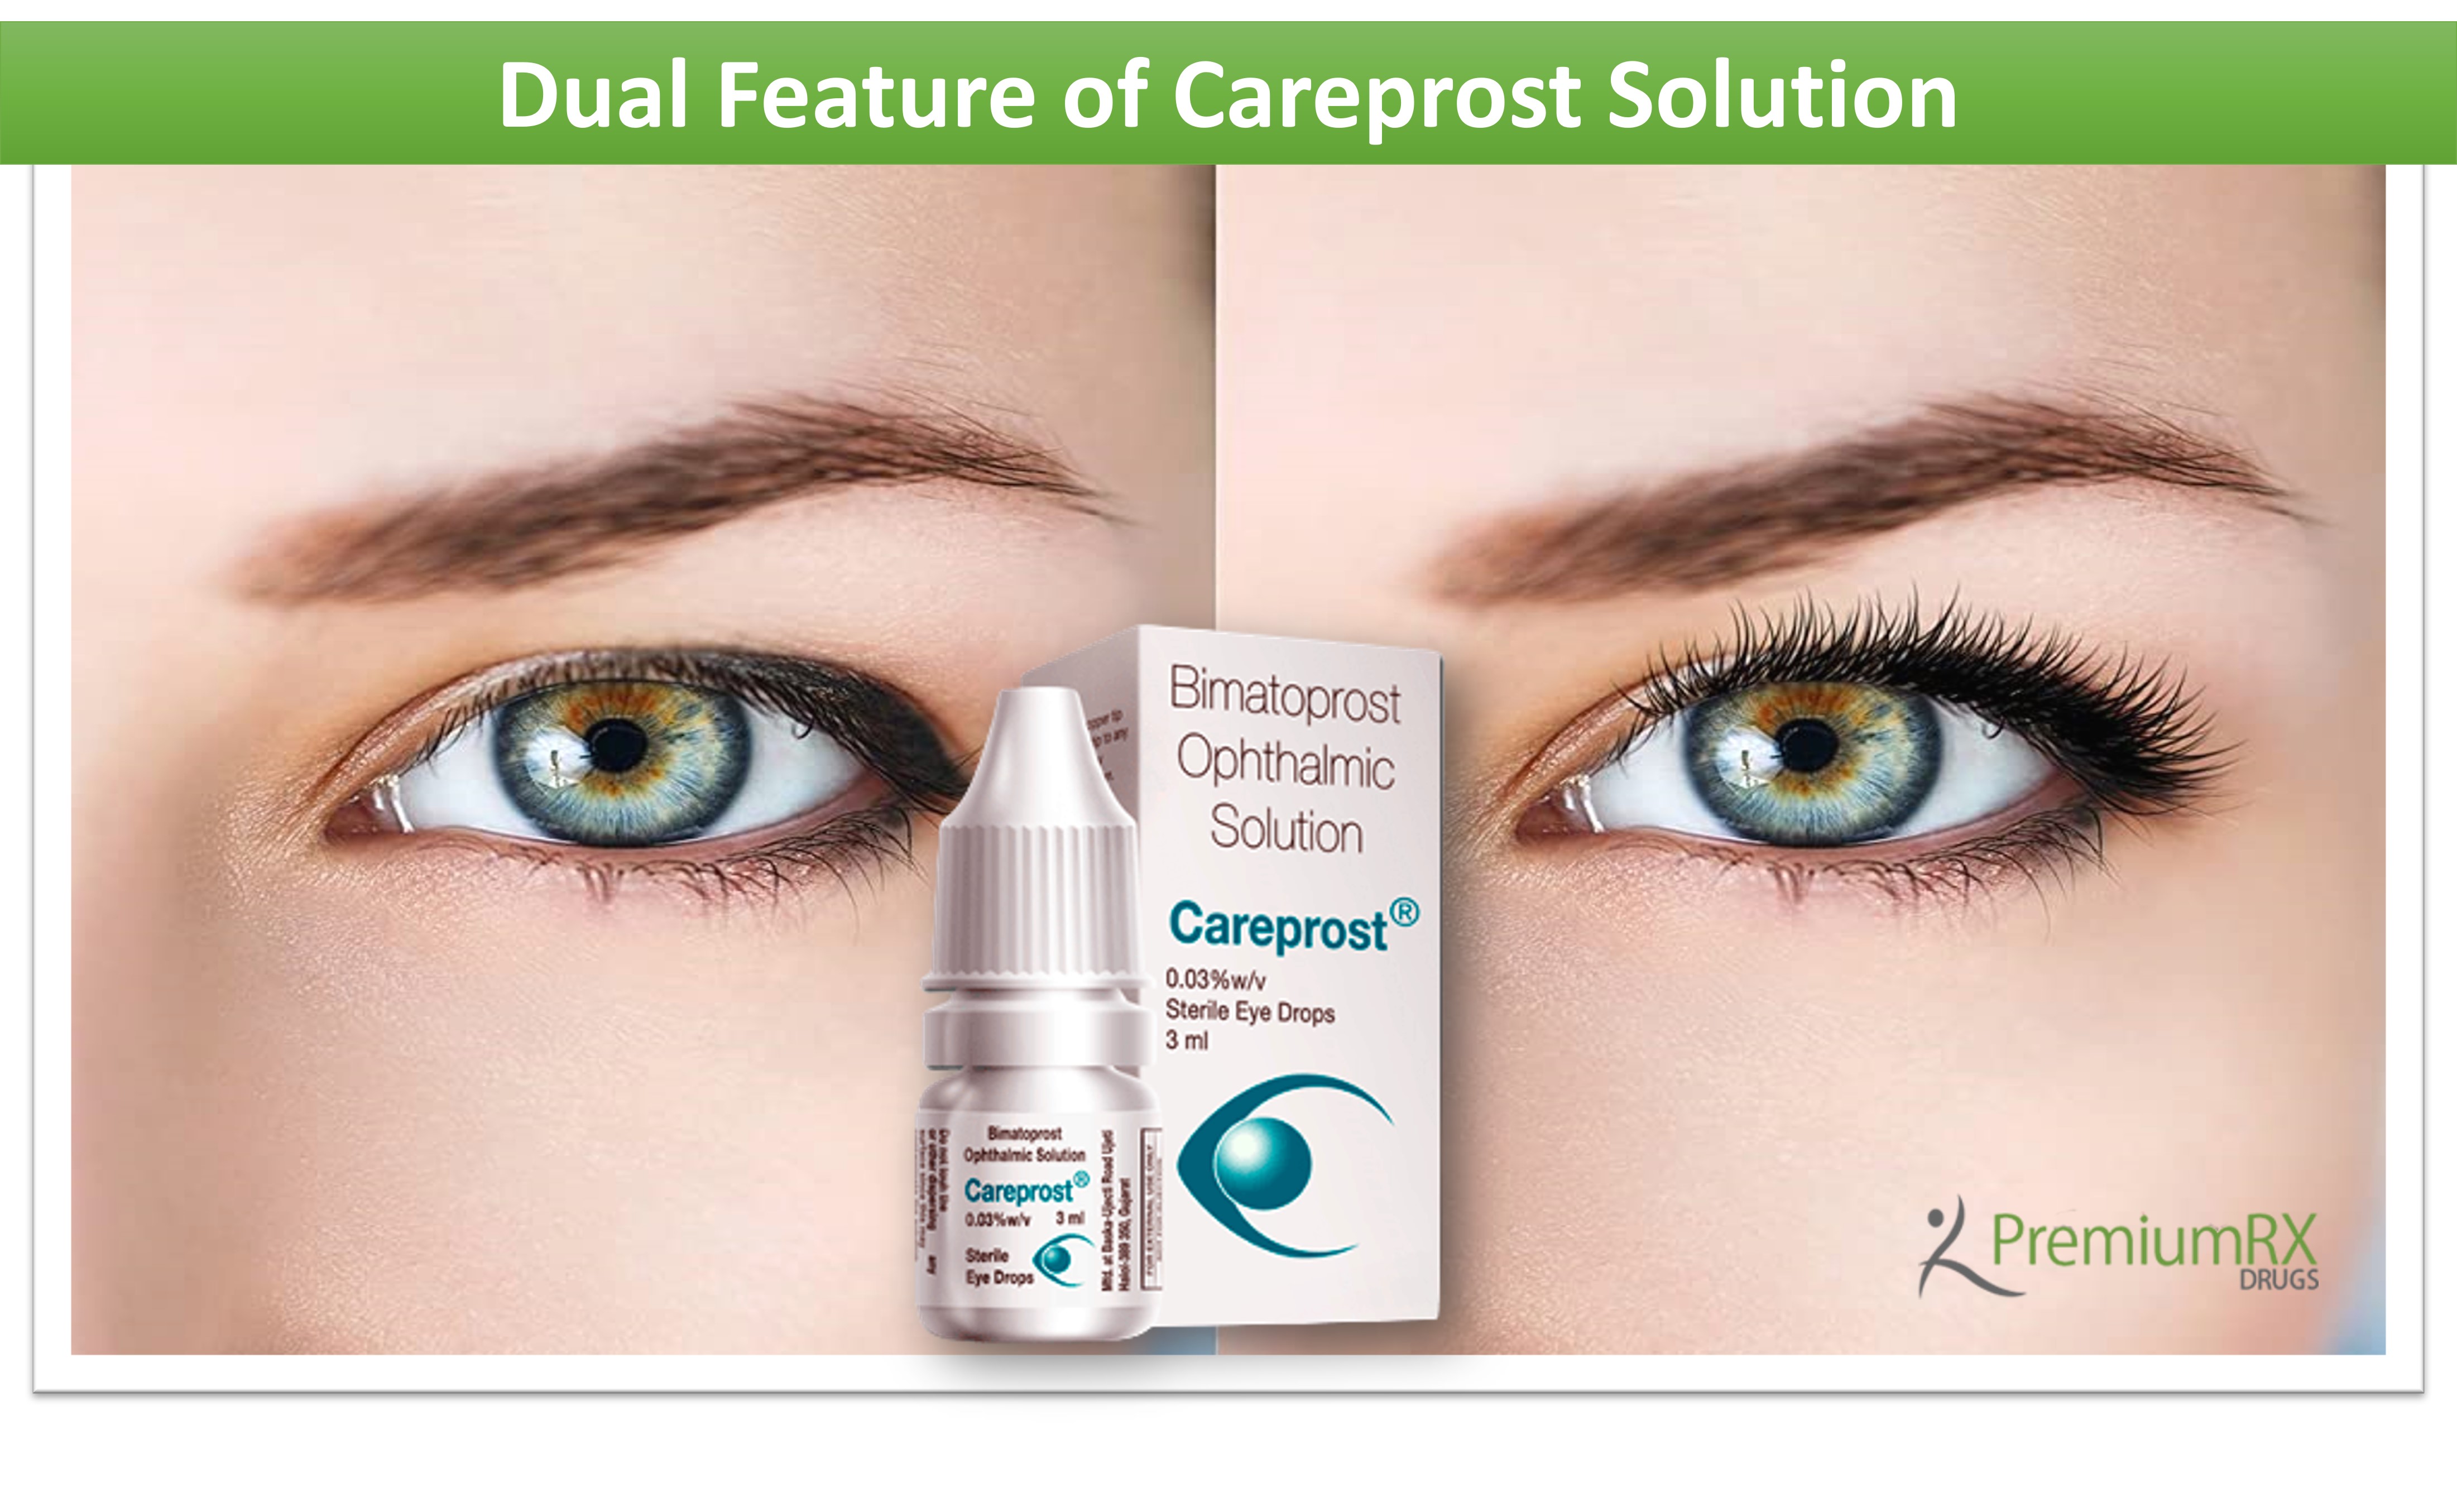 Dual Feature of Careprost Solution